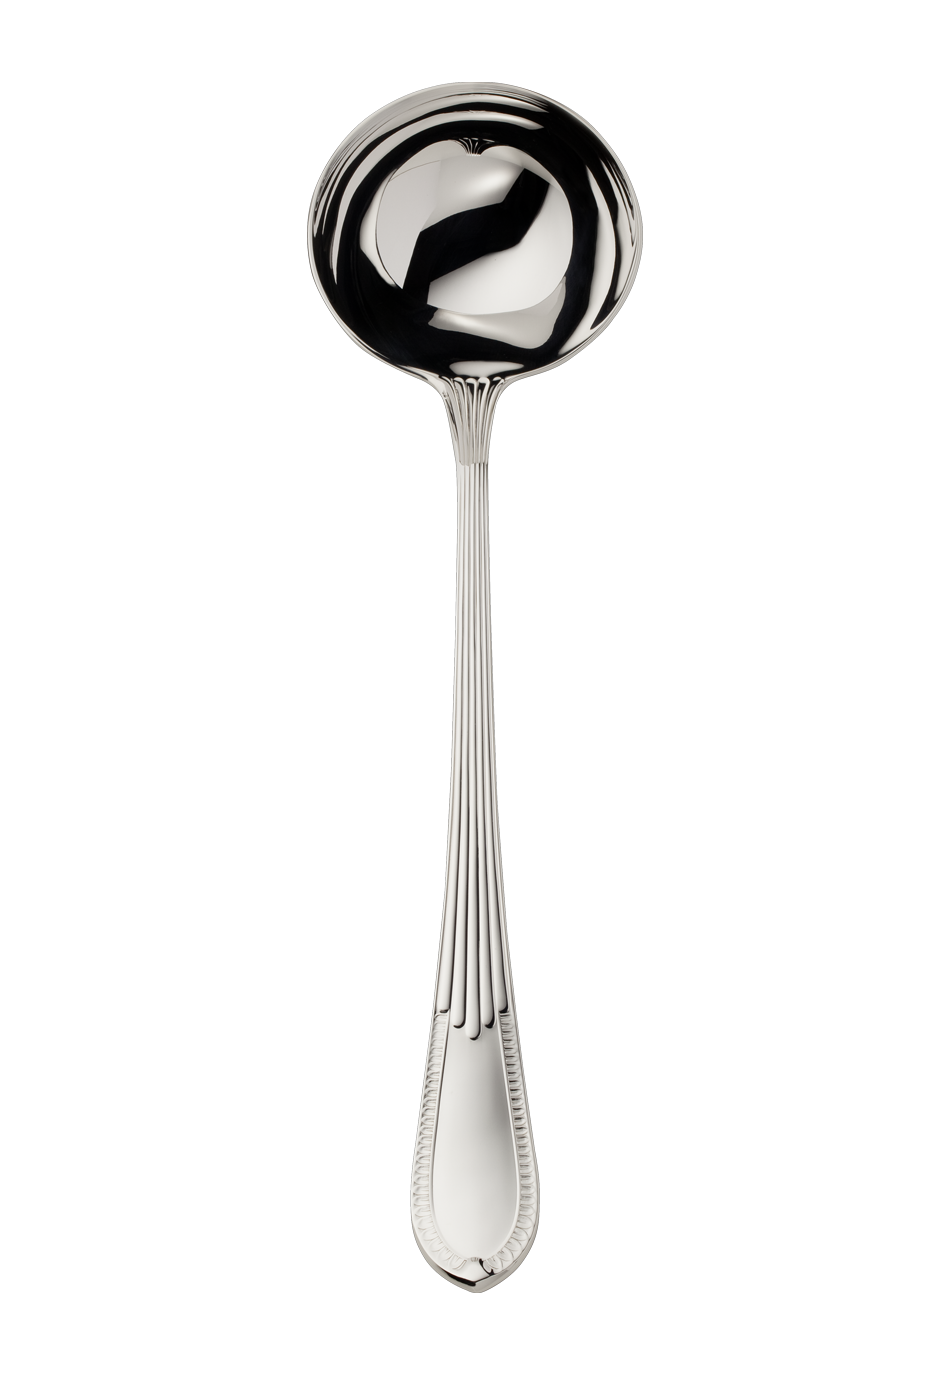 Belvedere Soup Ladle (150g massive silverplated)